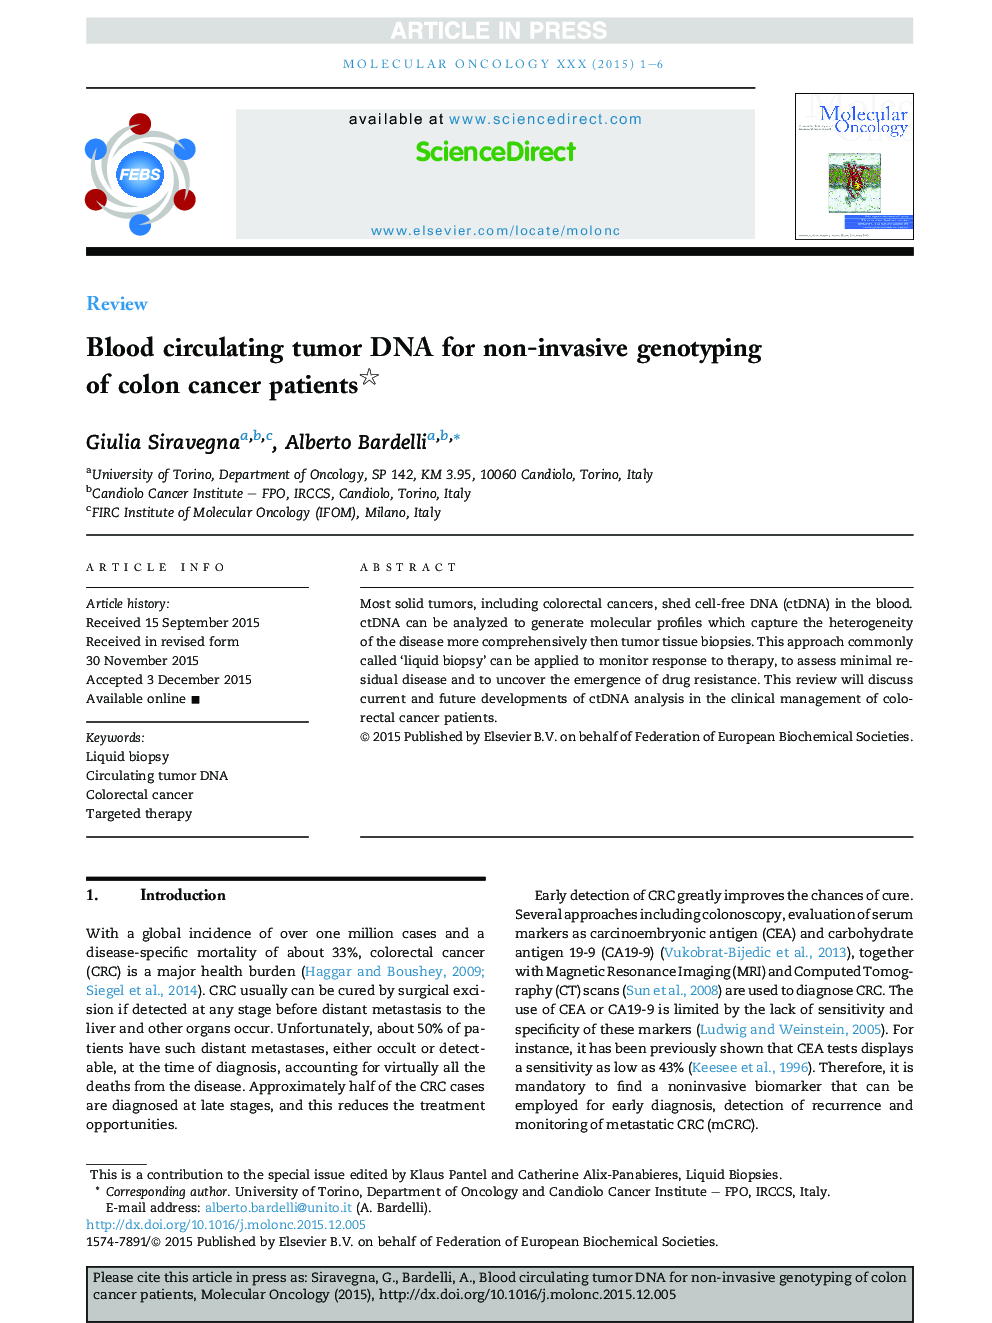 Blood circulating tumor DNA for non-invasive genotyping of colon cancer patients